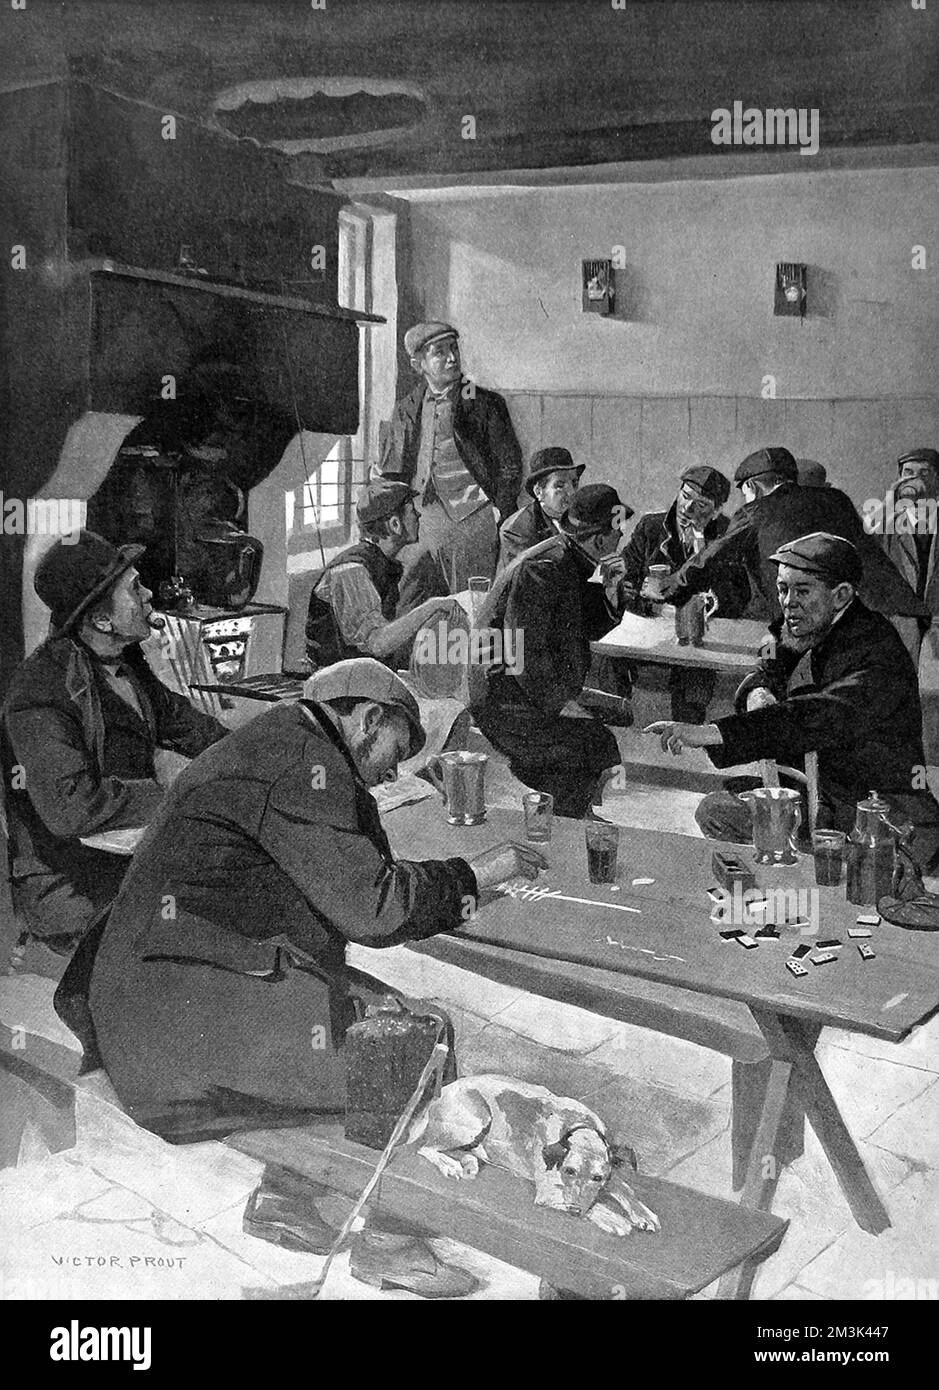 A bird singing match, in progress in a public house, in the East End of London. The birds, in little cages on the back wall, would be given a certain amount of time to sing and the number of notes that they produced would be recorded (in this case on the dining table in the foreground).     Date: 1903 Stock Photo